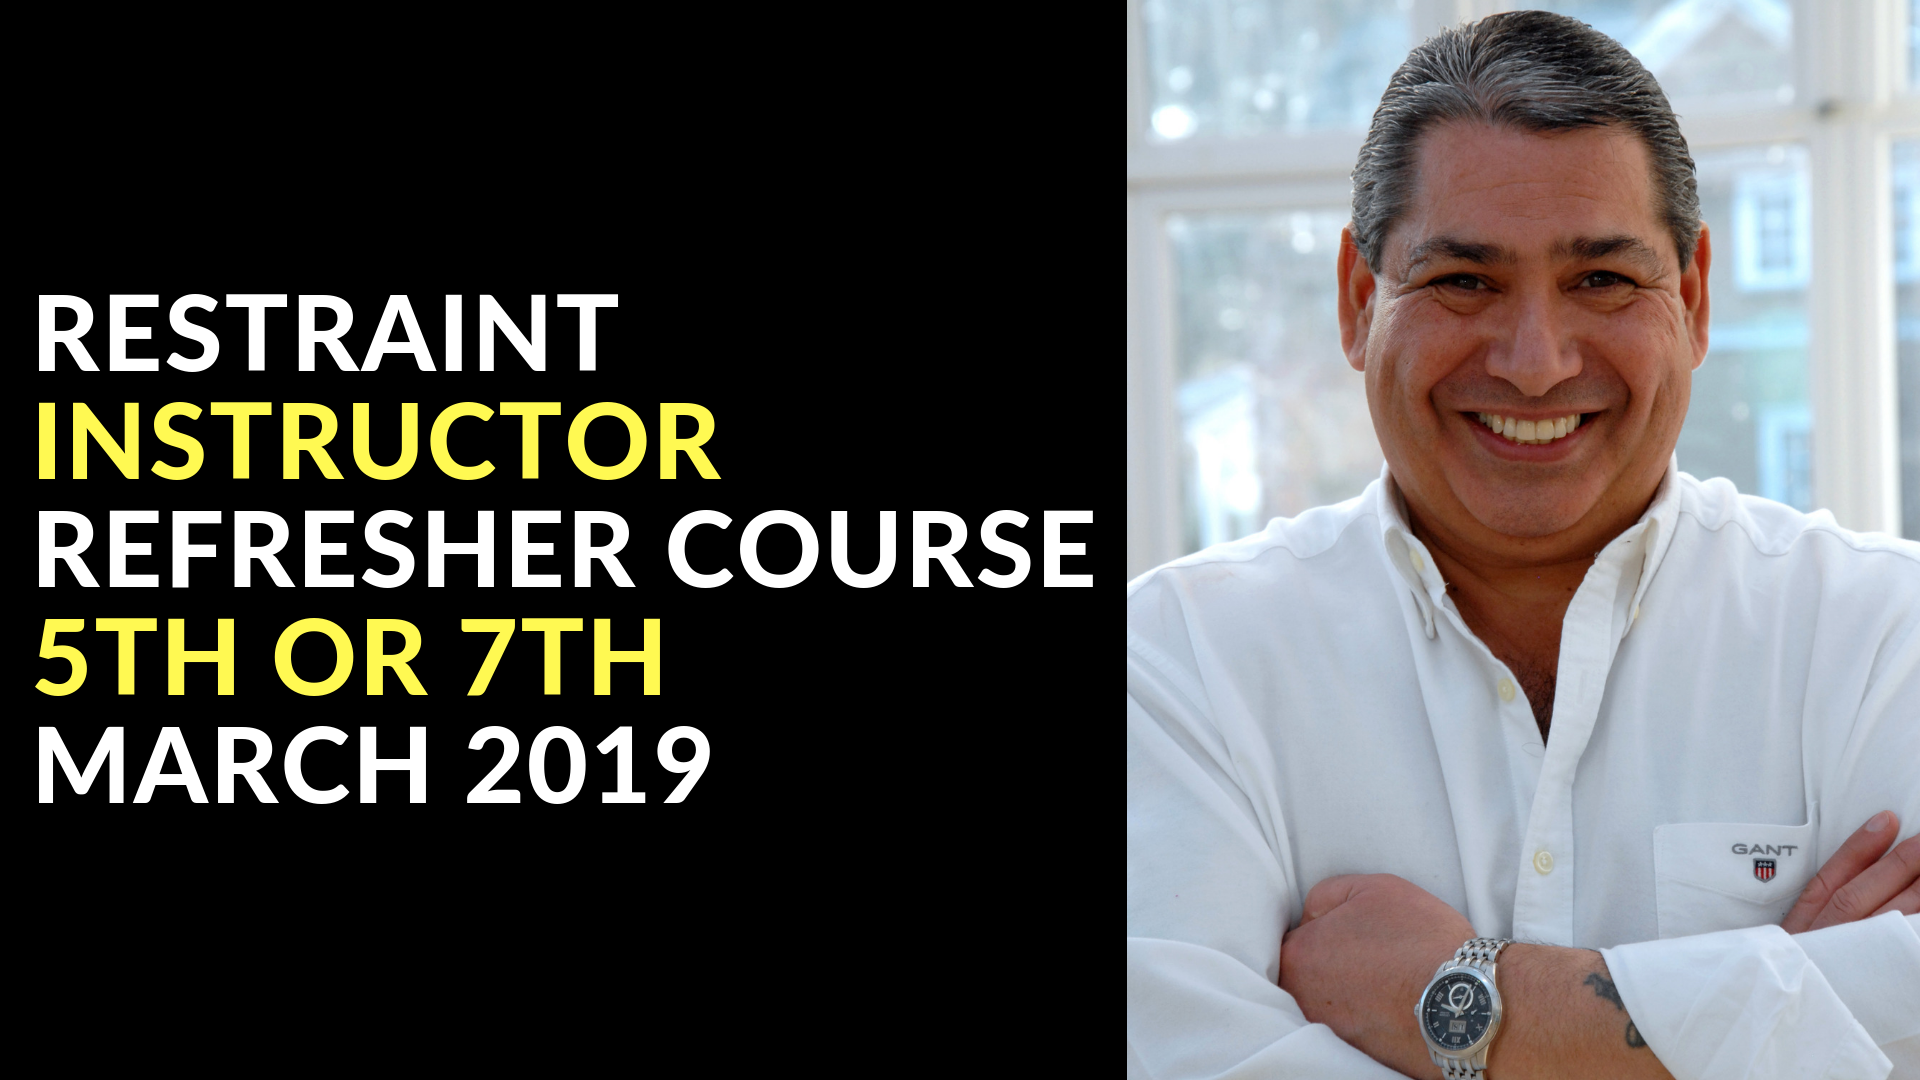 RESTRAINT INSTRUCTOR REFRESHER COURSE 5TH OR 7TH MARCH 2019